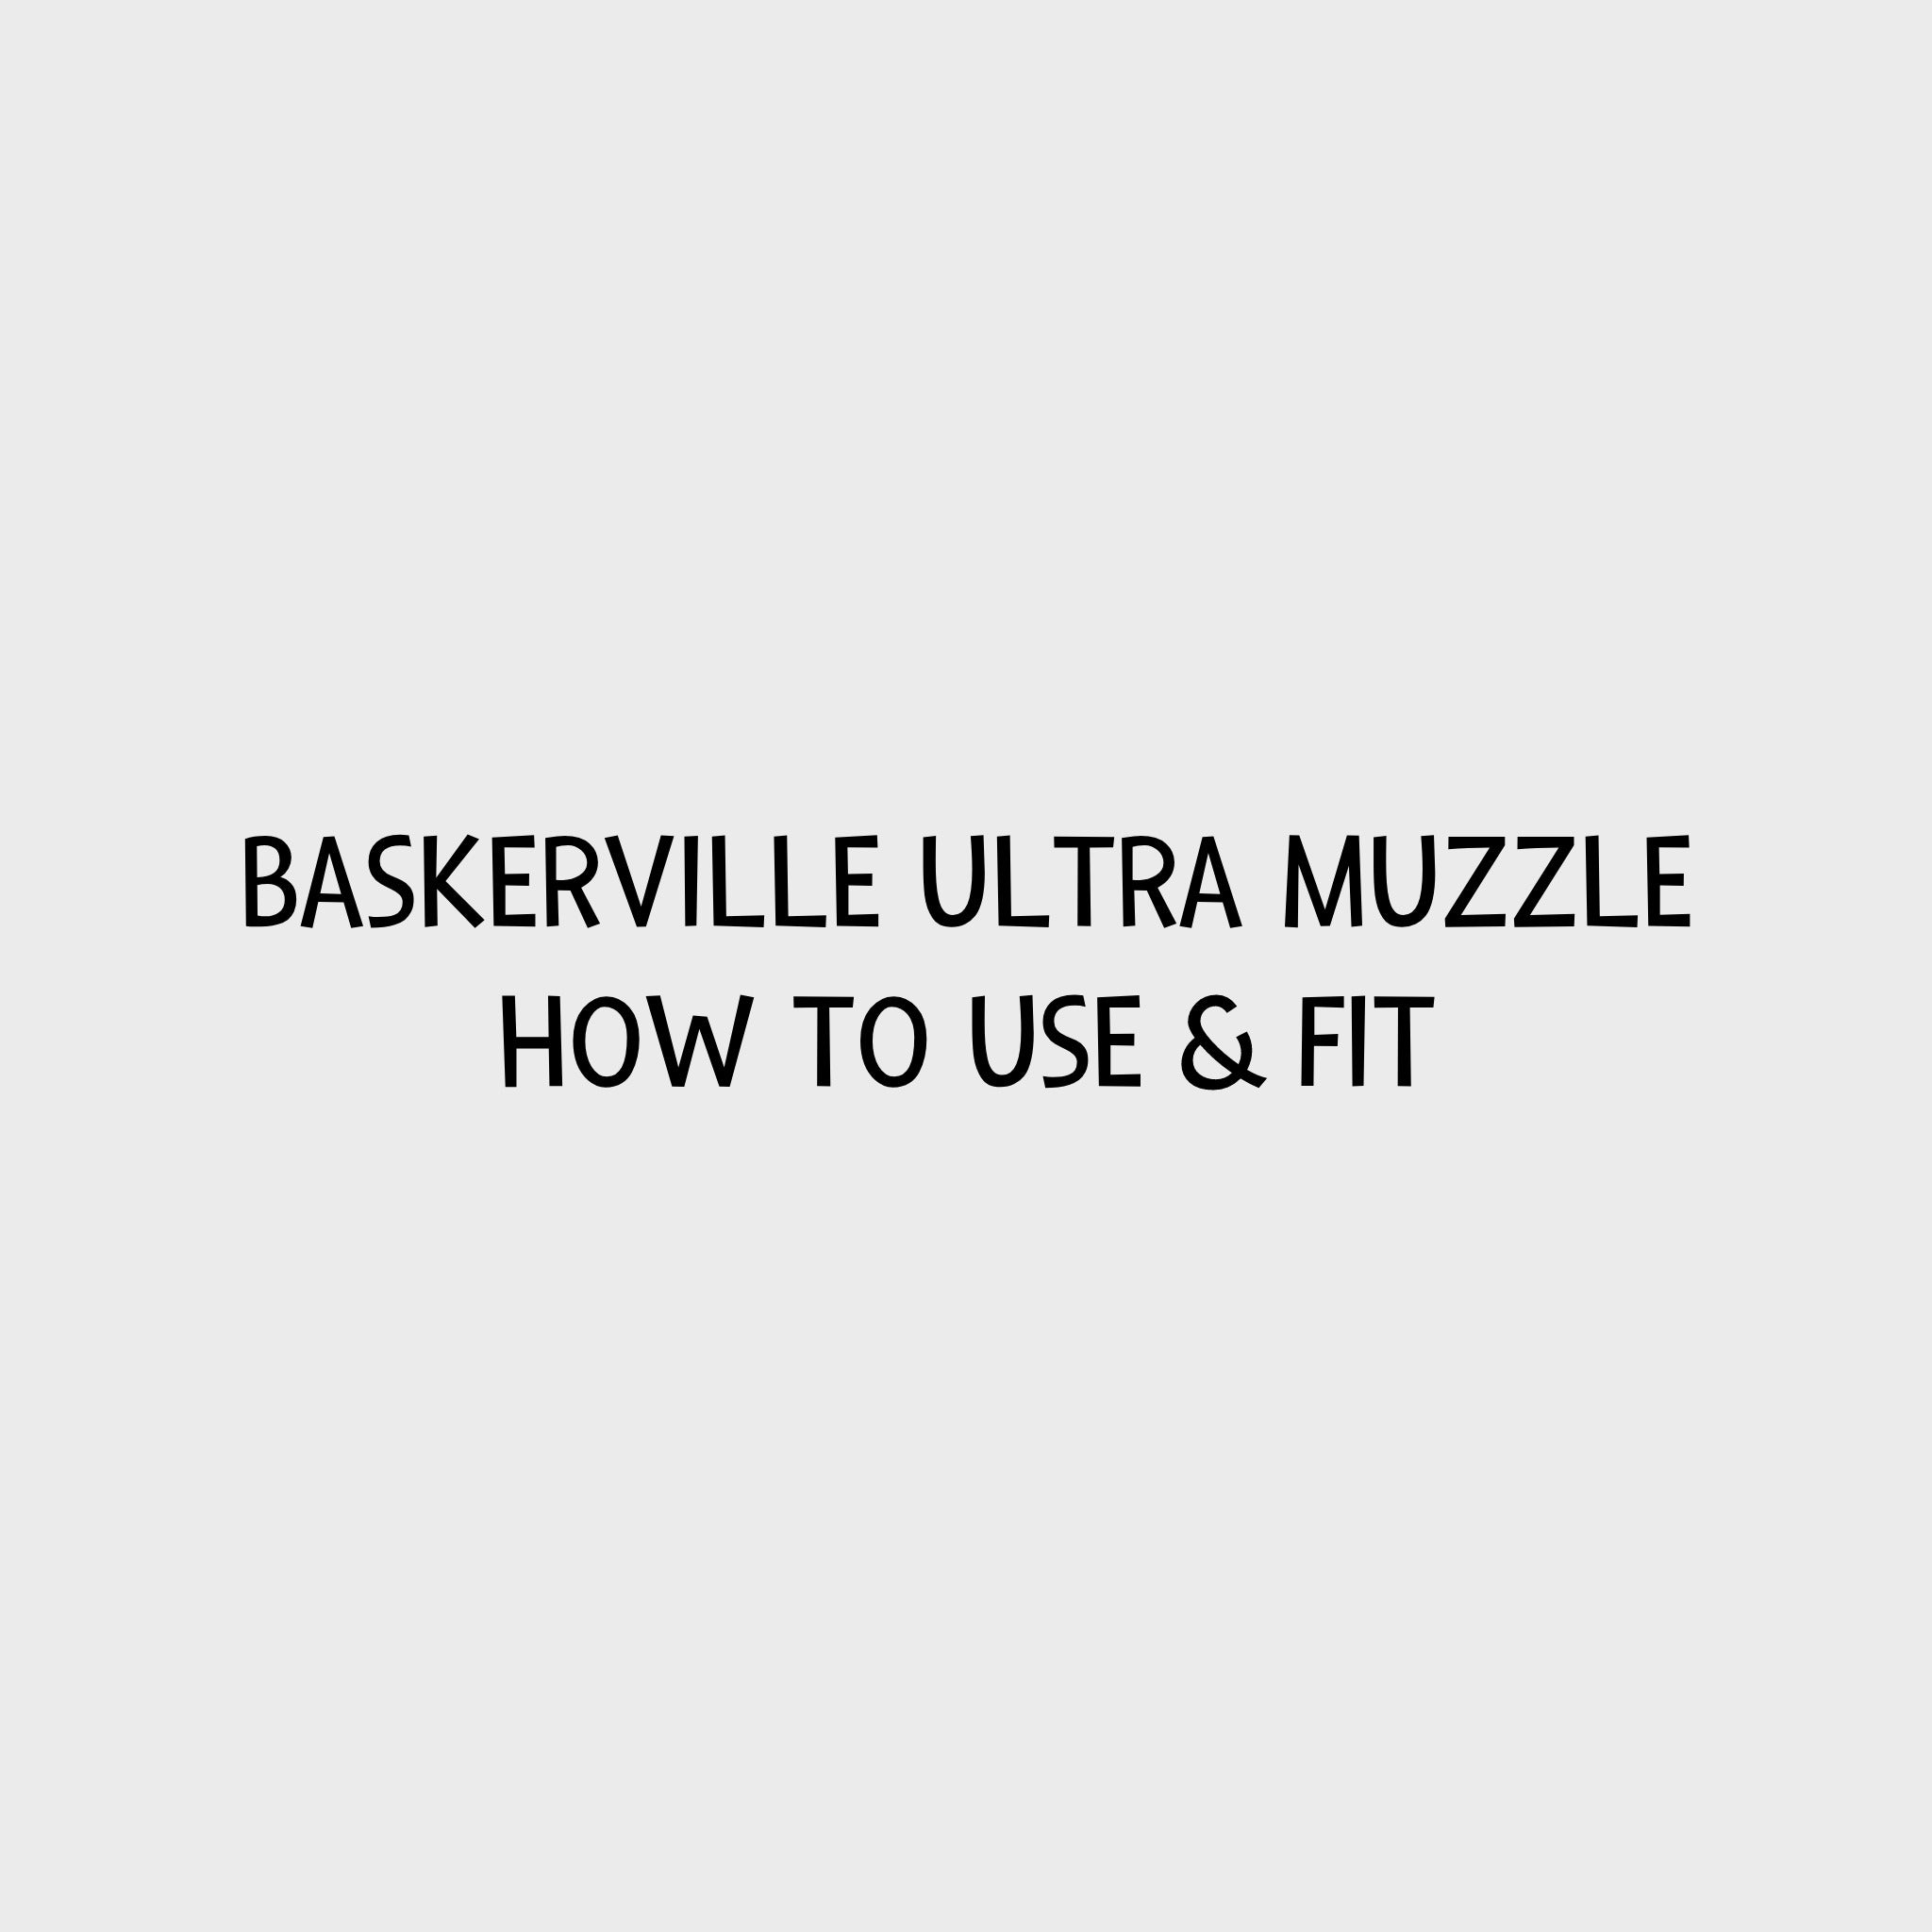 Video - Baskerville Ultra Muzzle - How to use & fit